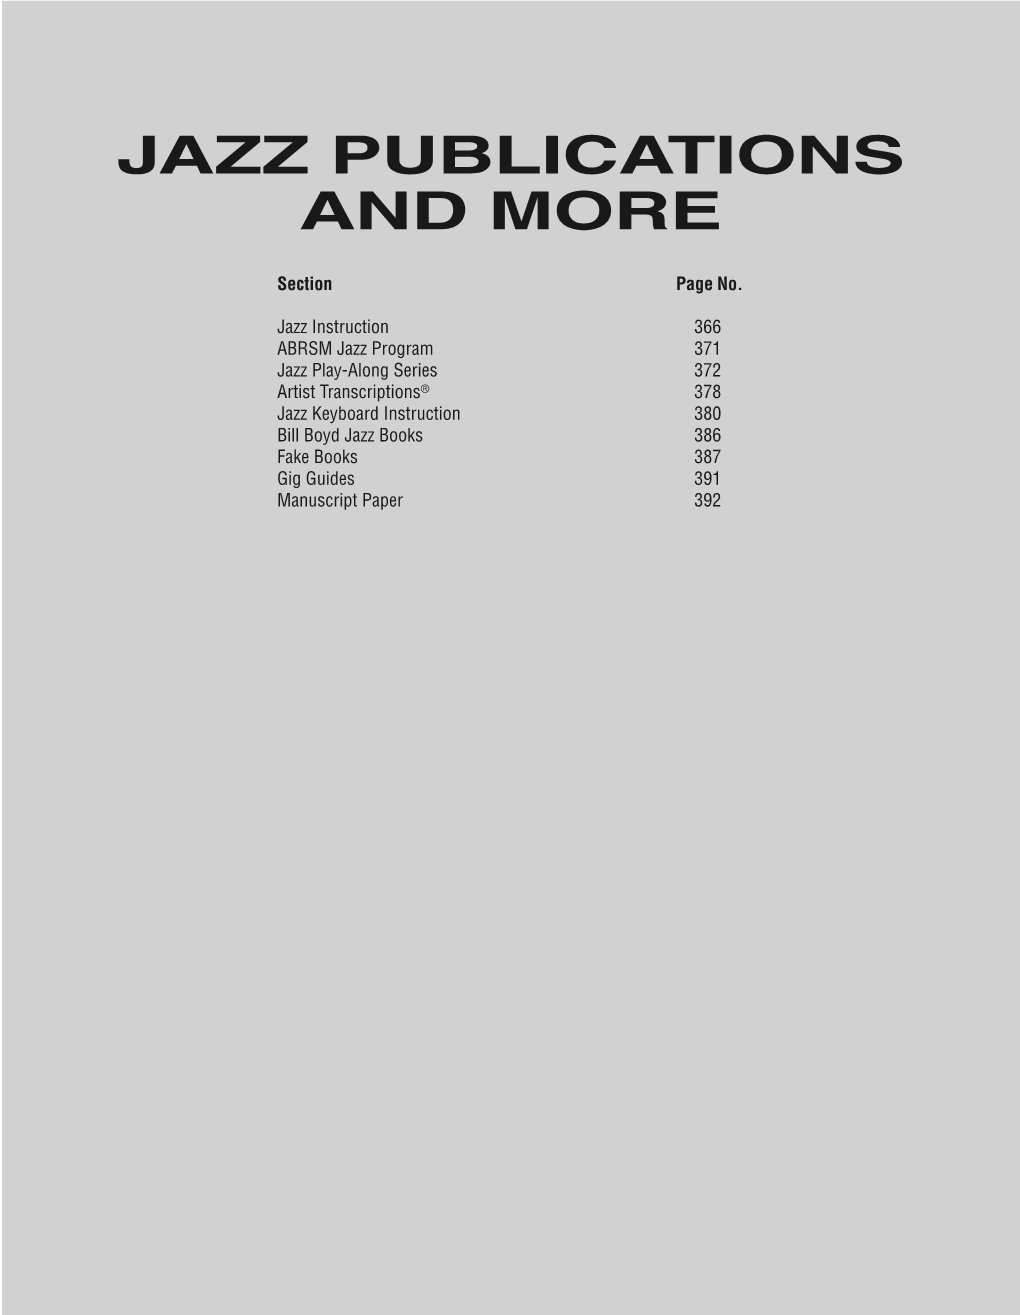 Jazz Publications and More